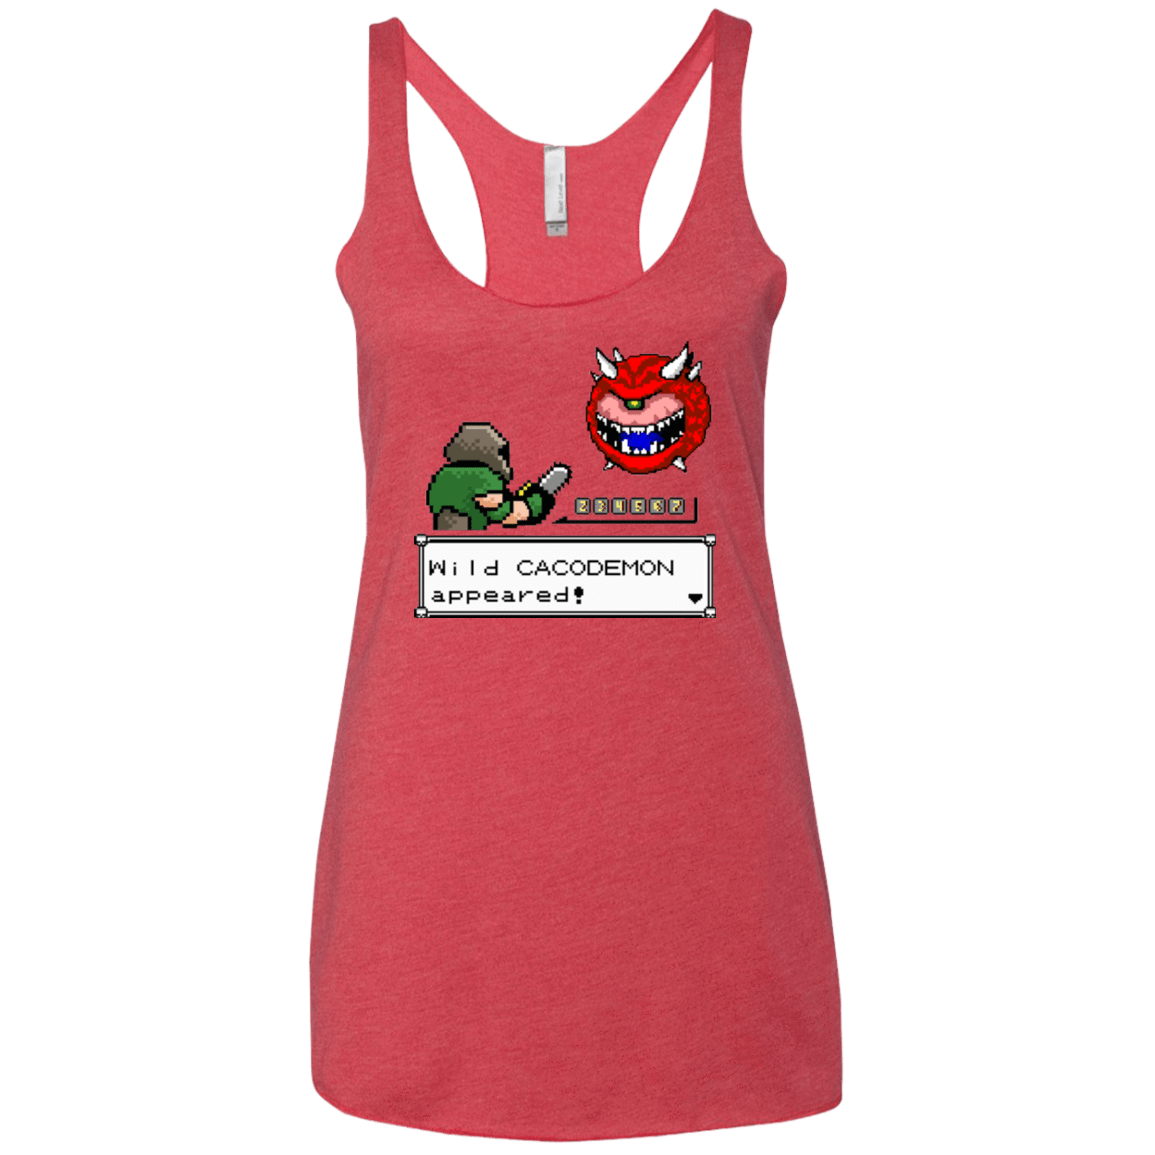 T-Shirts Vintage Red / X-Small A Wild Cacodemon Women's Triblend Racerback Tank